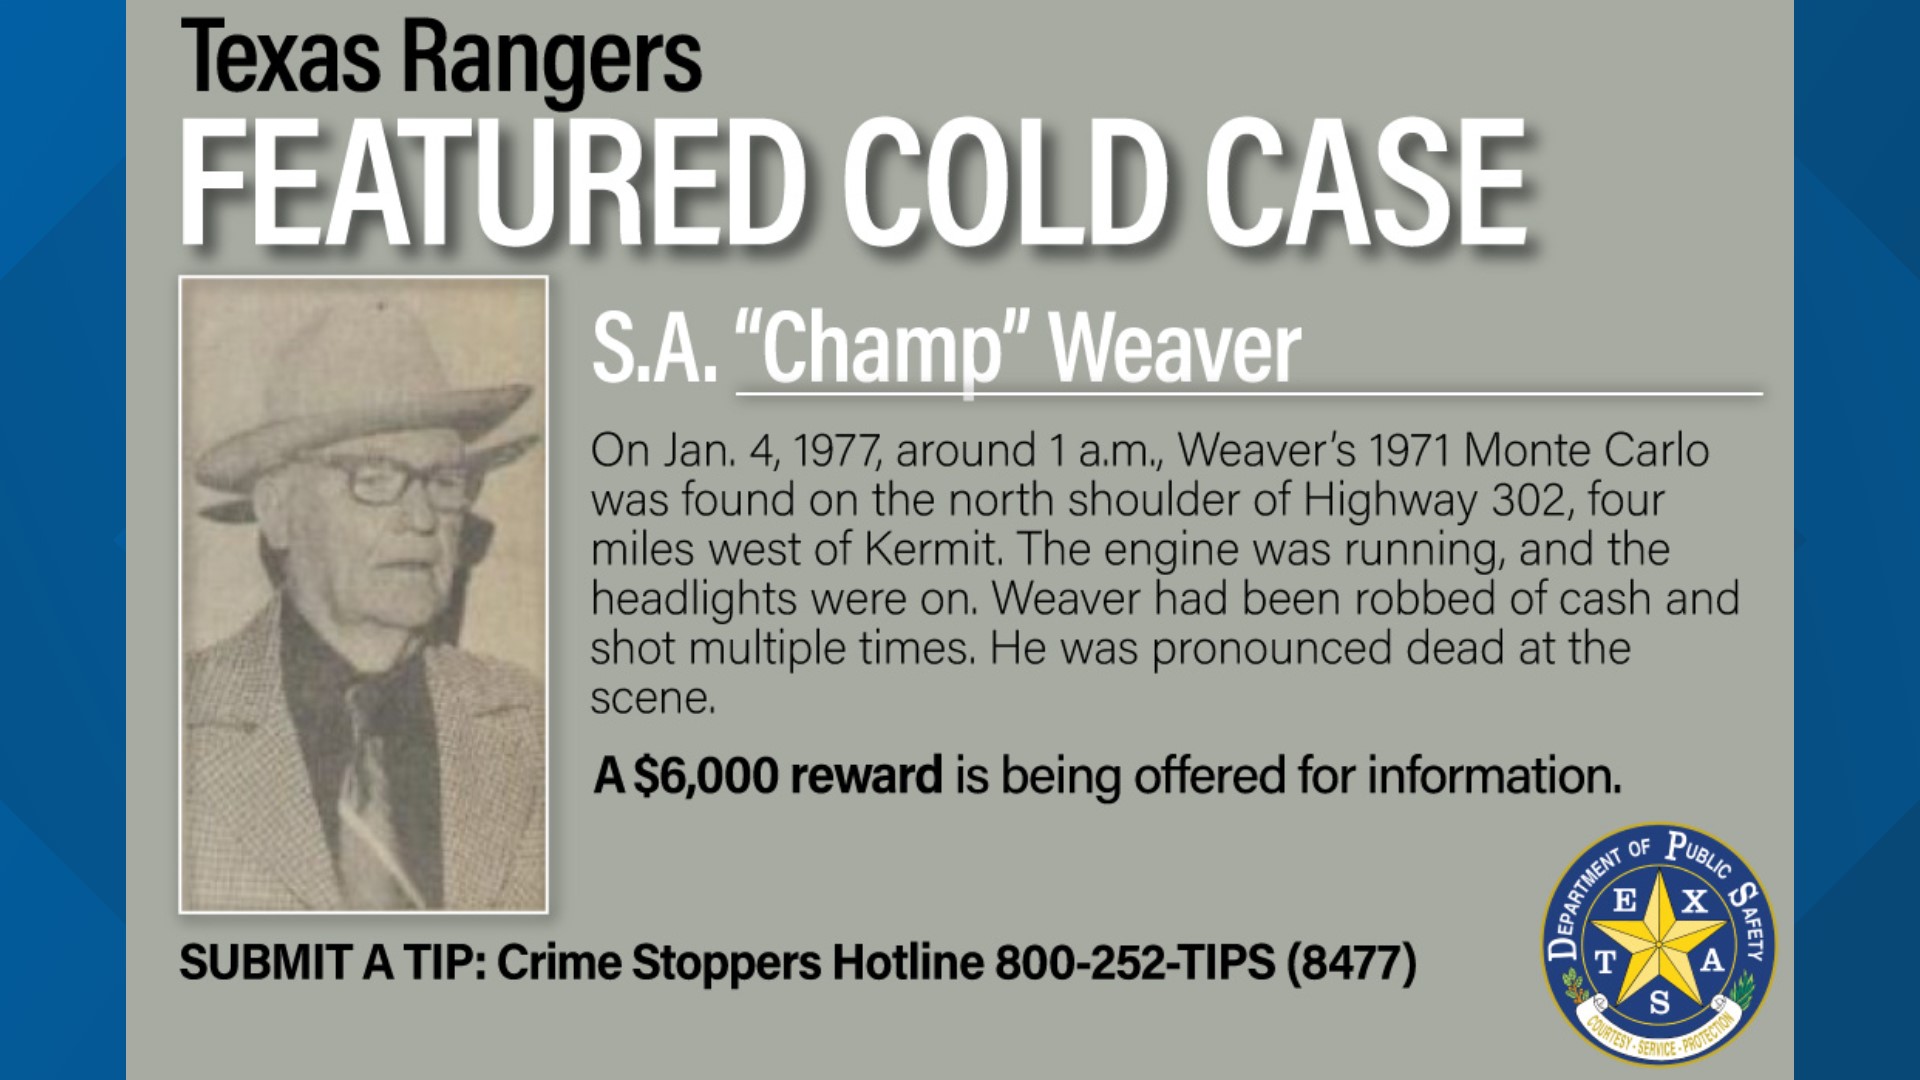 The reward for information that leads to an arrest in connection to the killing of S.A. "Champ" Weaver has temporarily been raised to $6,000.